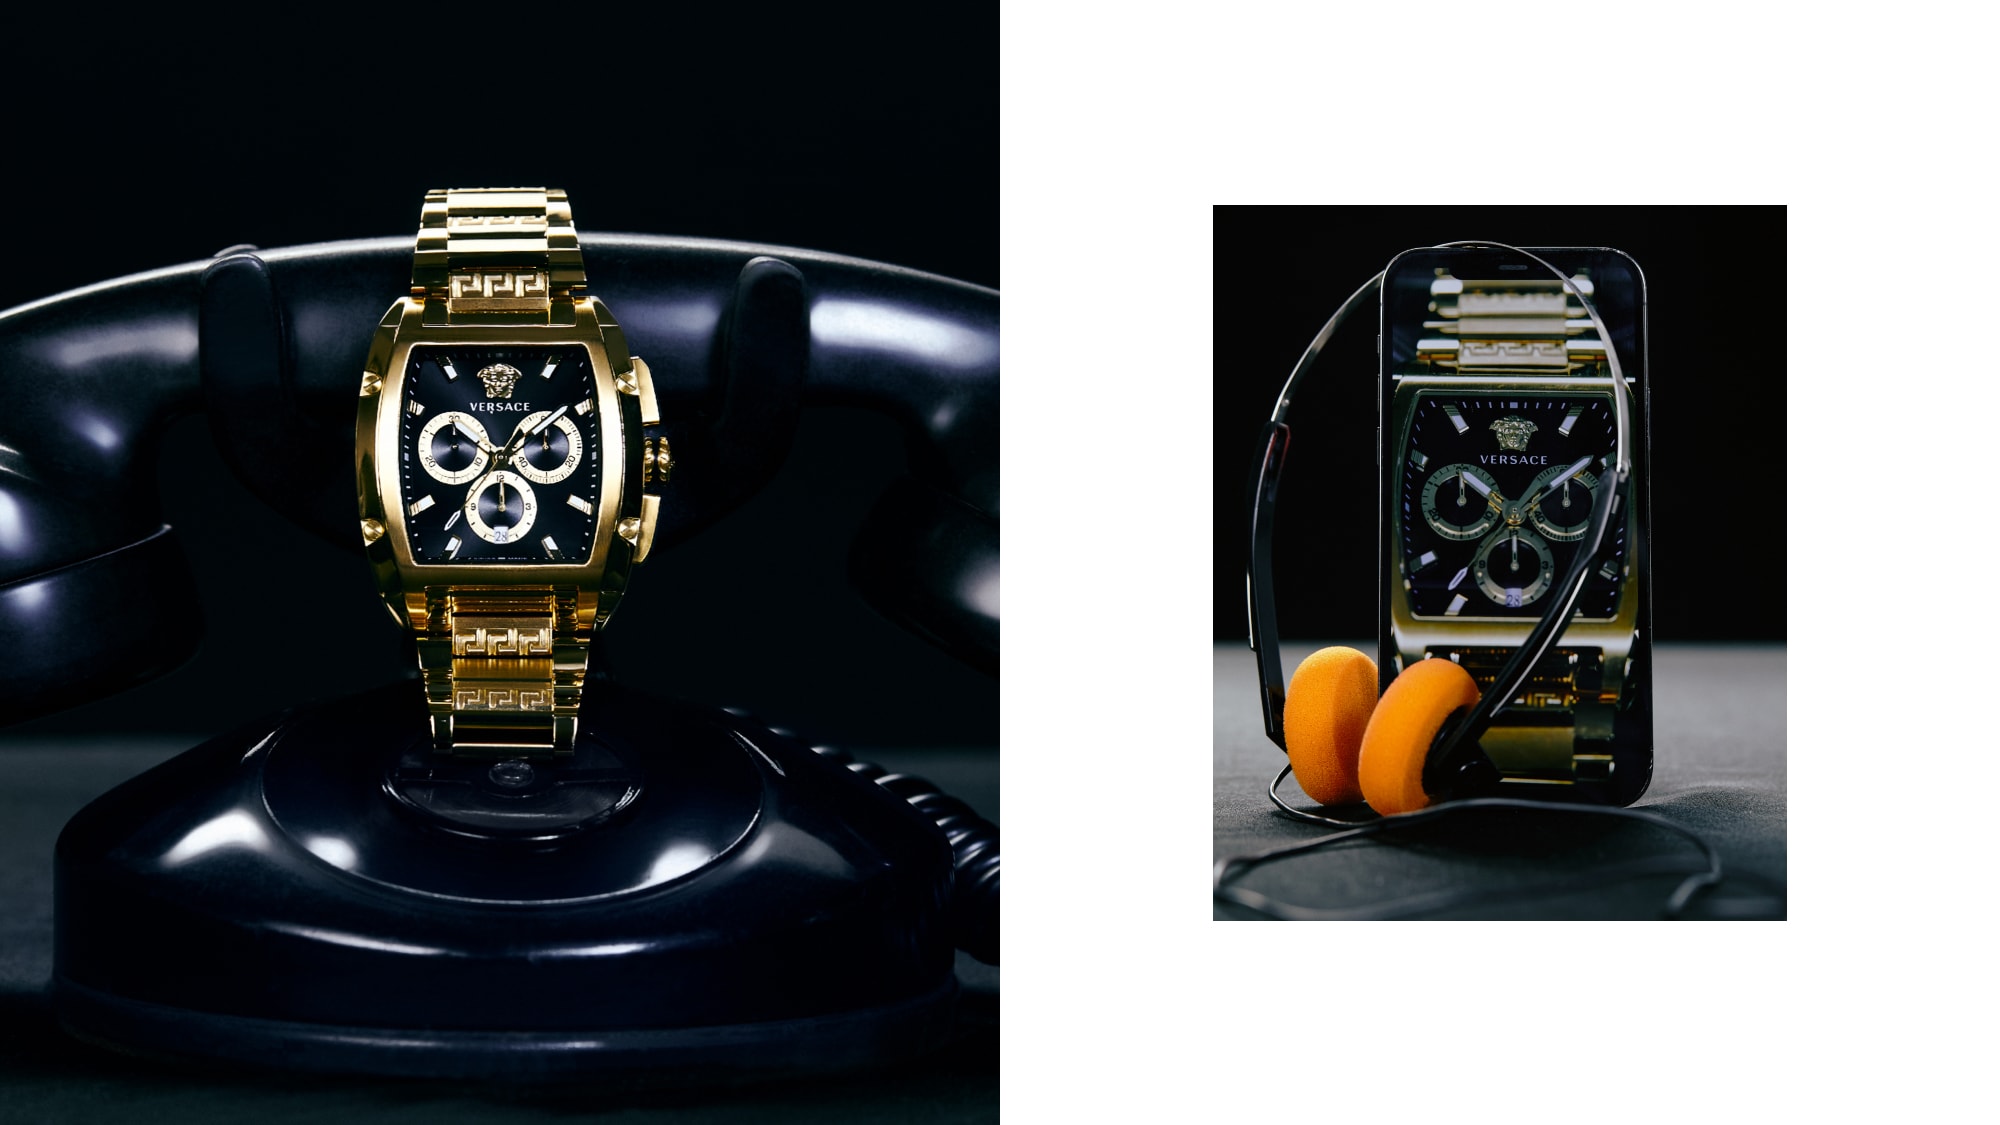 The Versace Dominus Champagne Case Watch is a Symbol of Timelessness